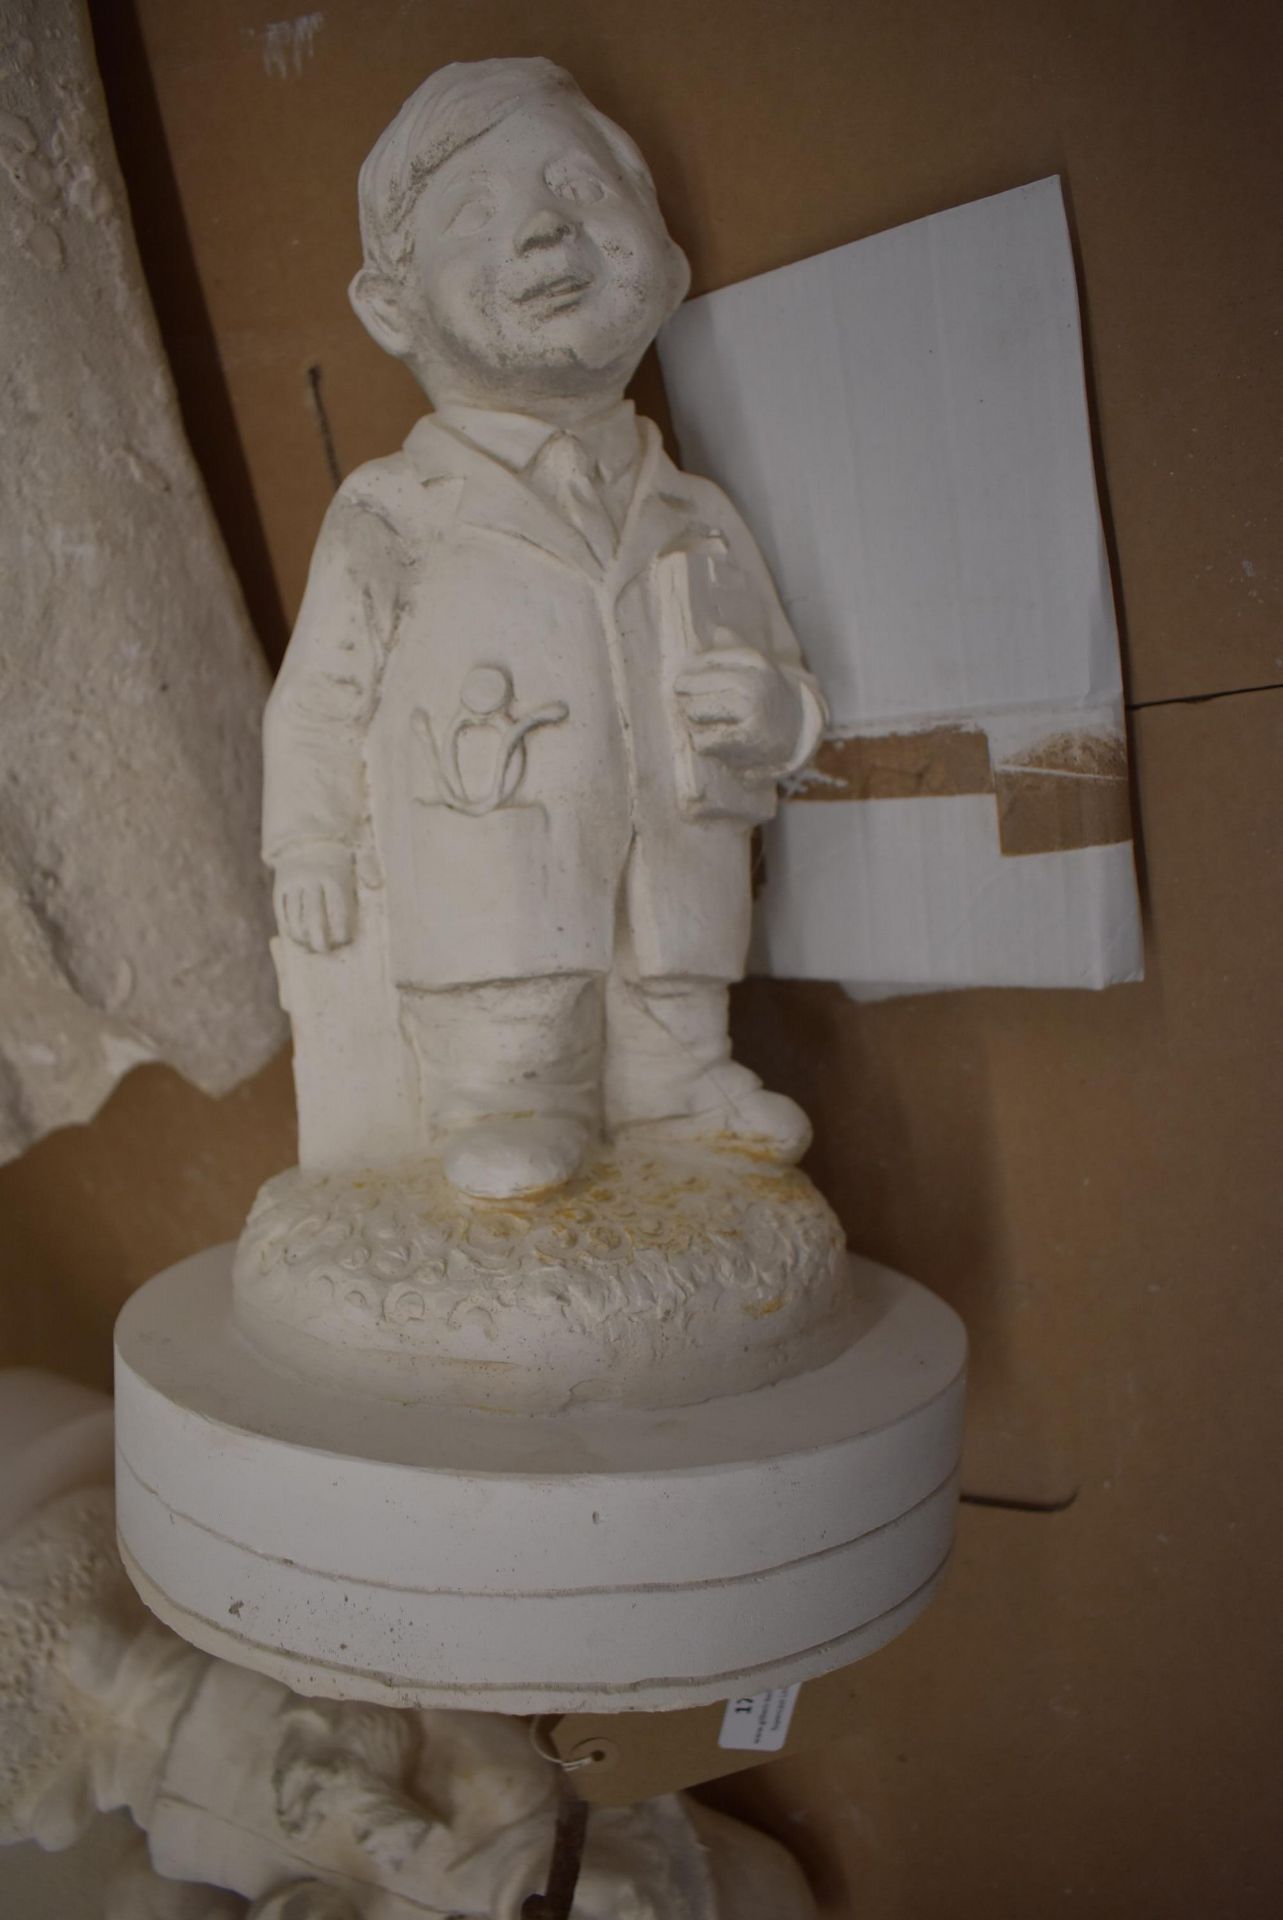 *Young Boy in Doctor Outfit Cast ~16” tall, 9.5” diameter